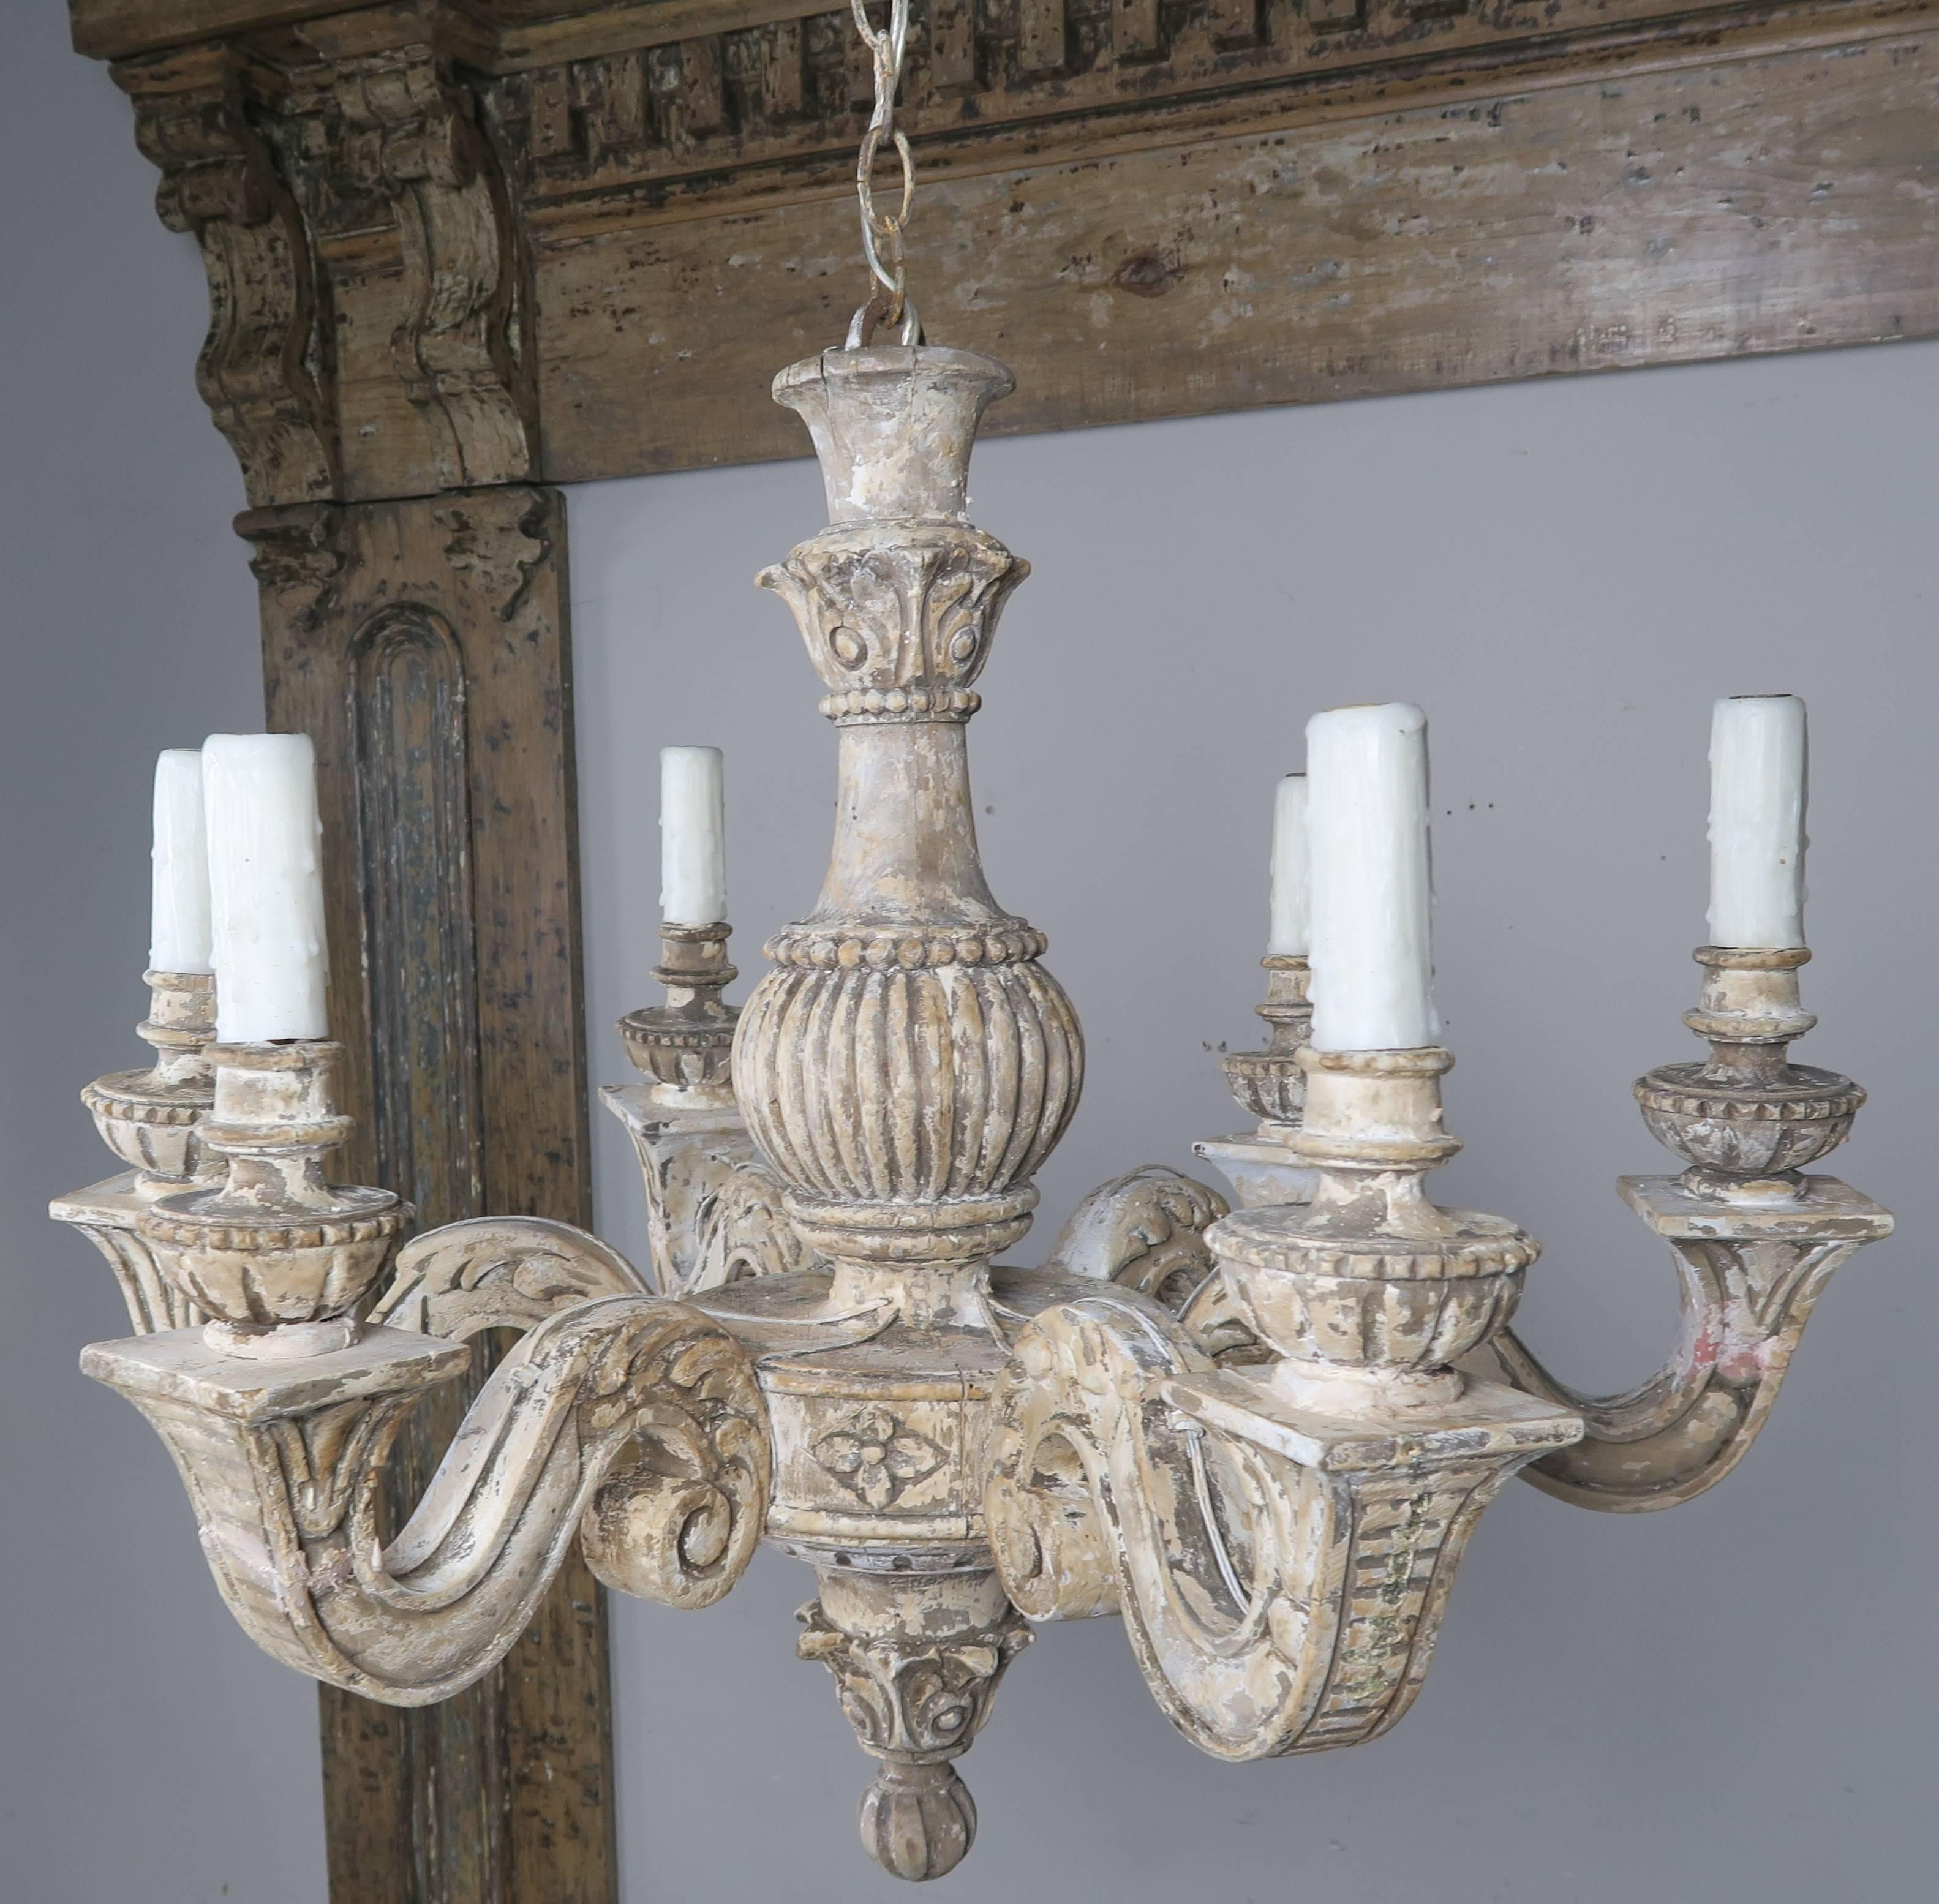 Six-light carved wood painted Italian chandelier newly rewired with drip wax candle covers. Includes chain and canopy.